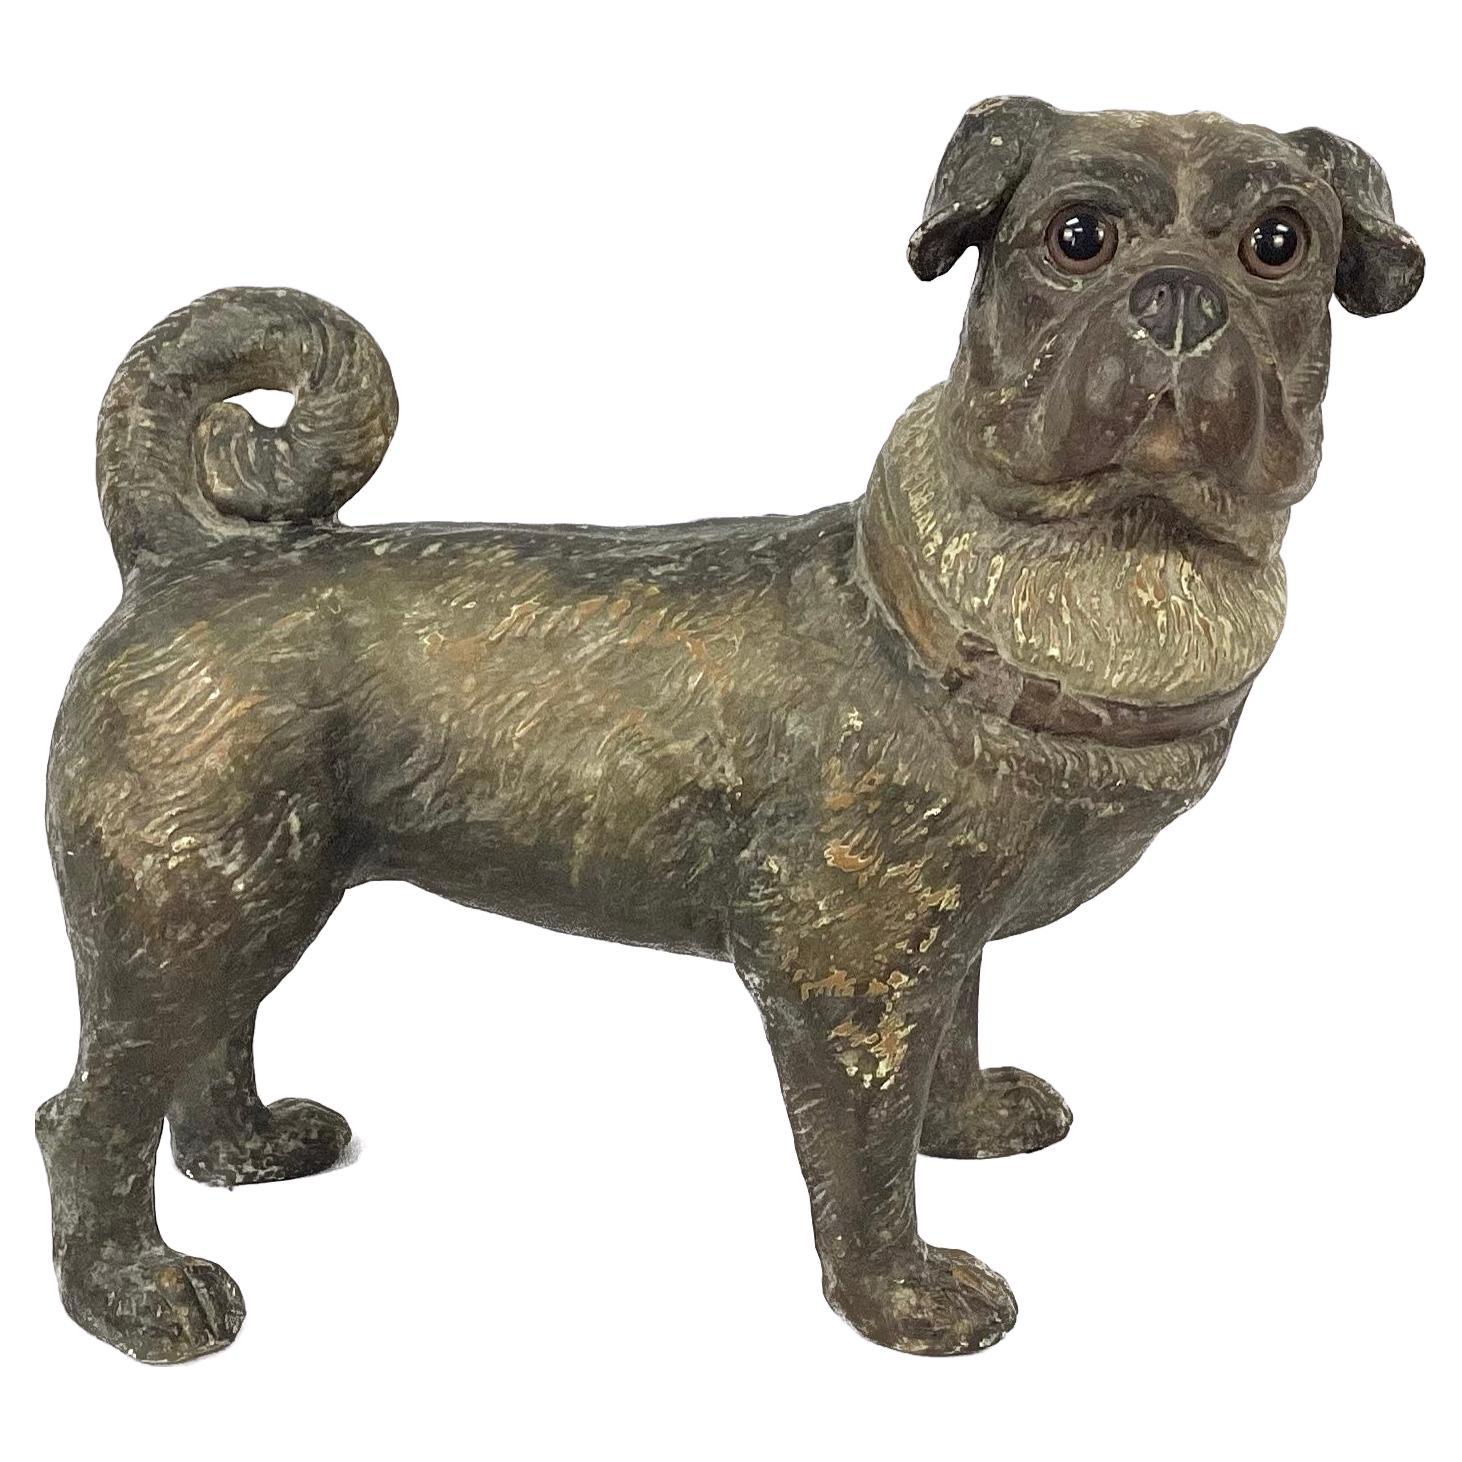 Terracotta Pug Dog With Glass Eyes For Sale